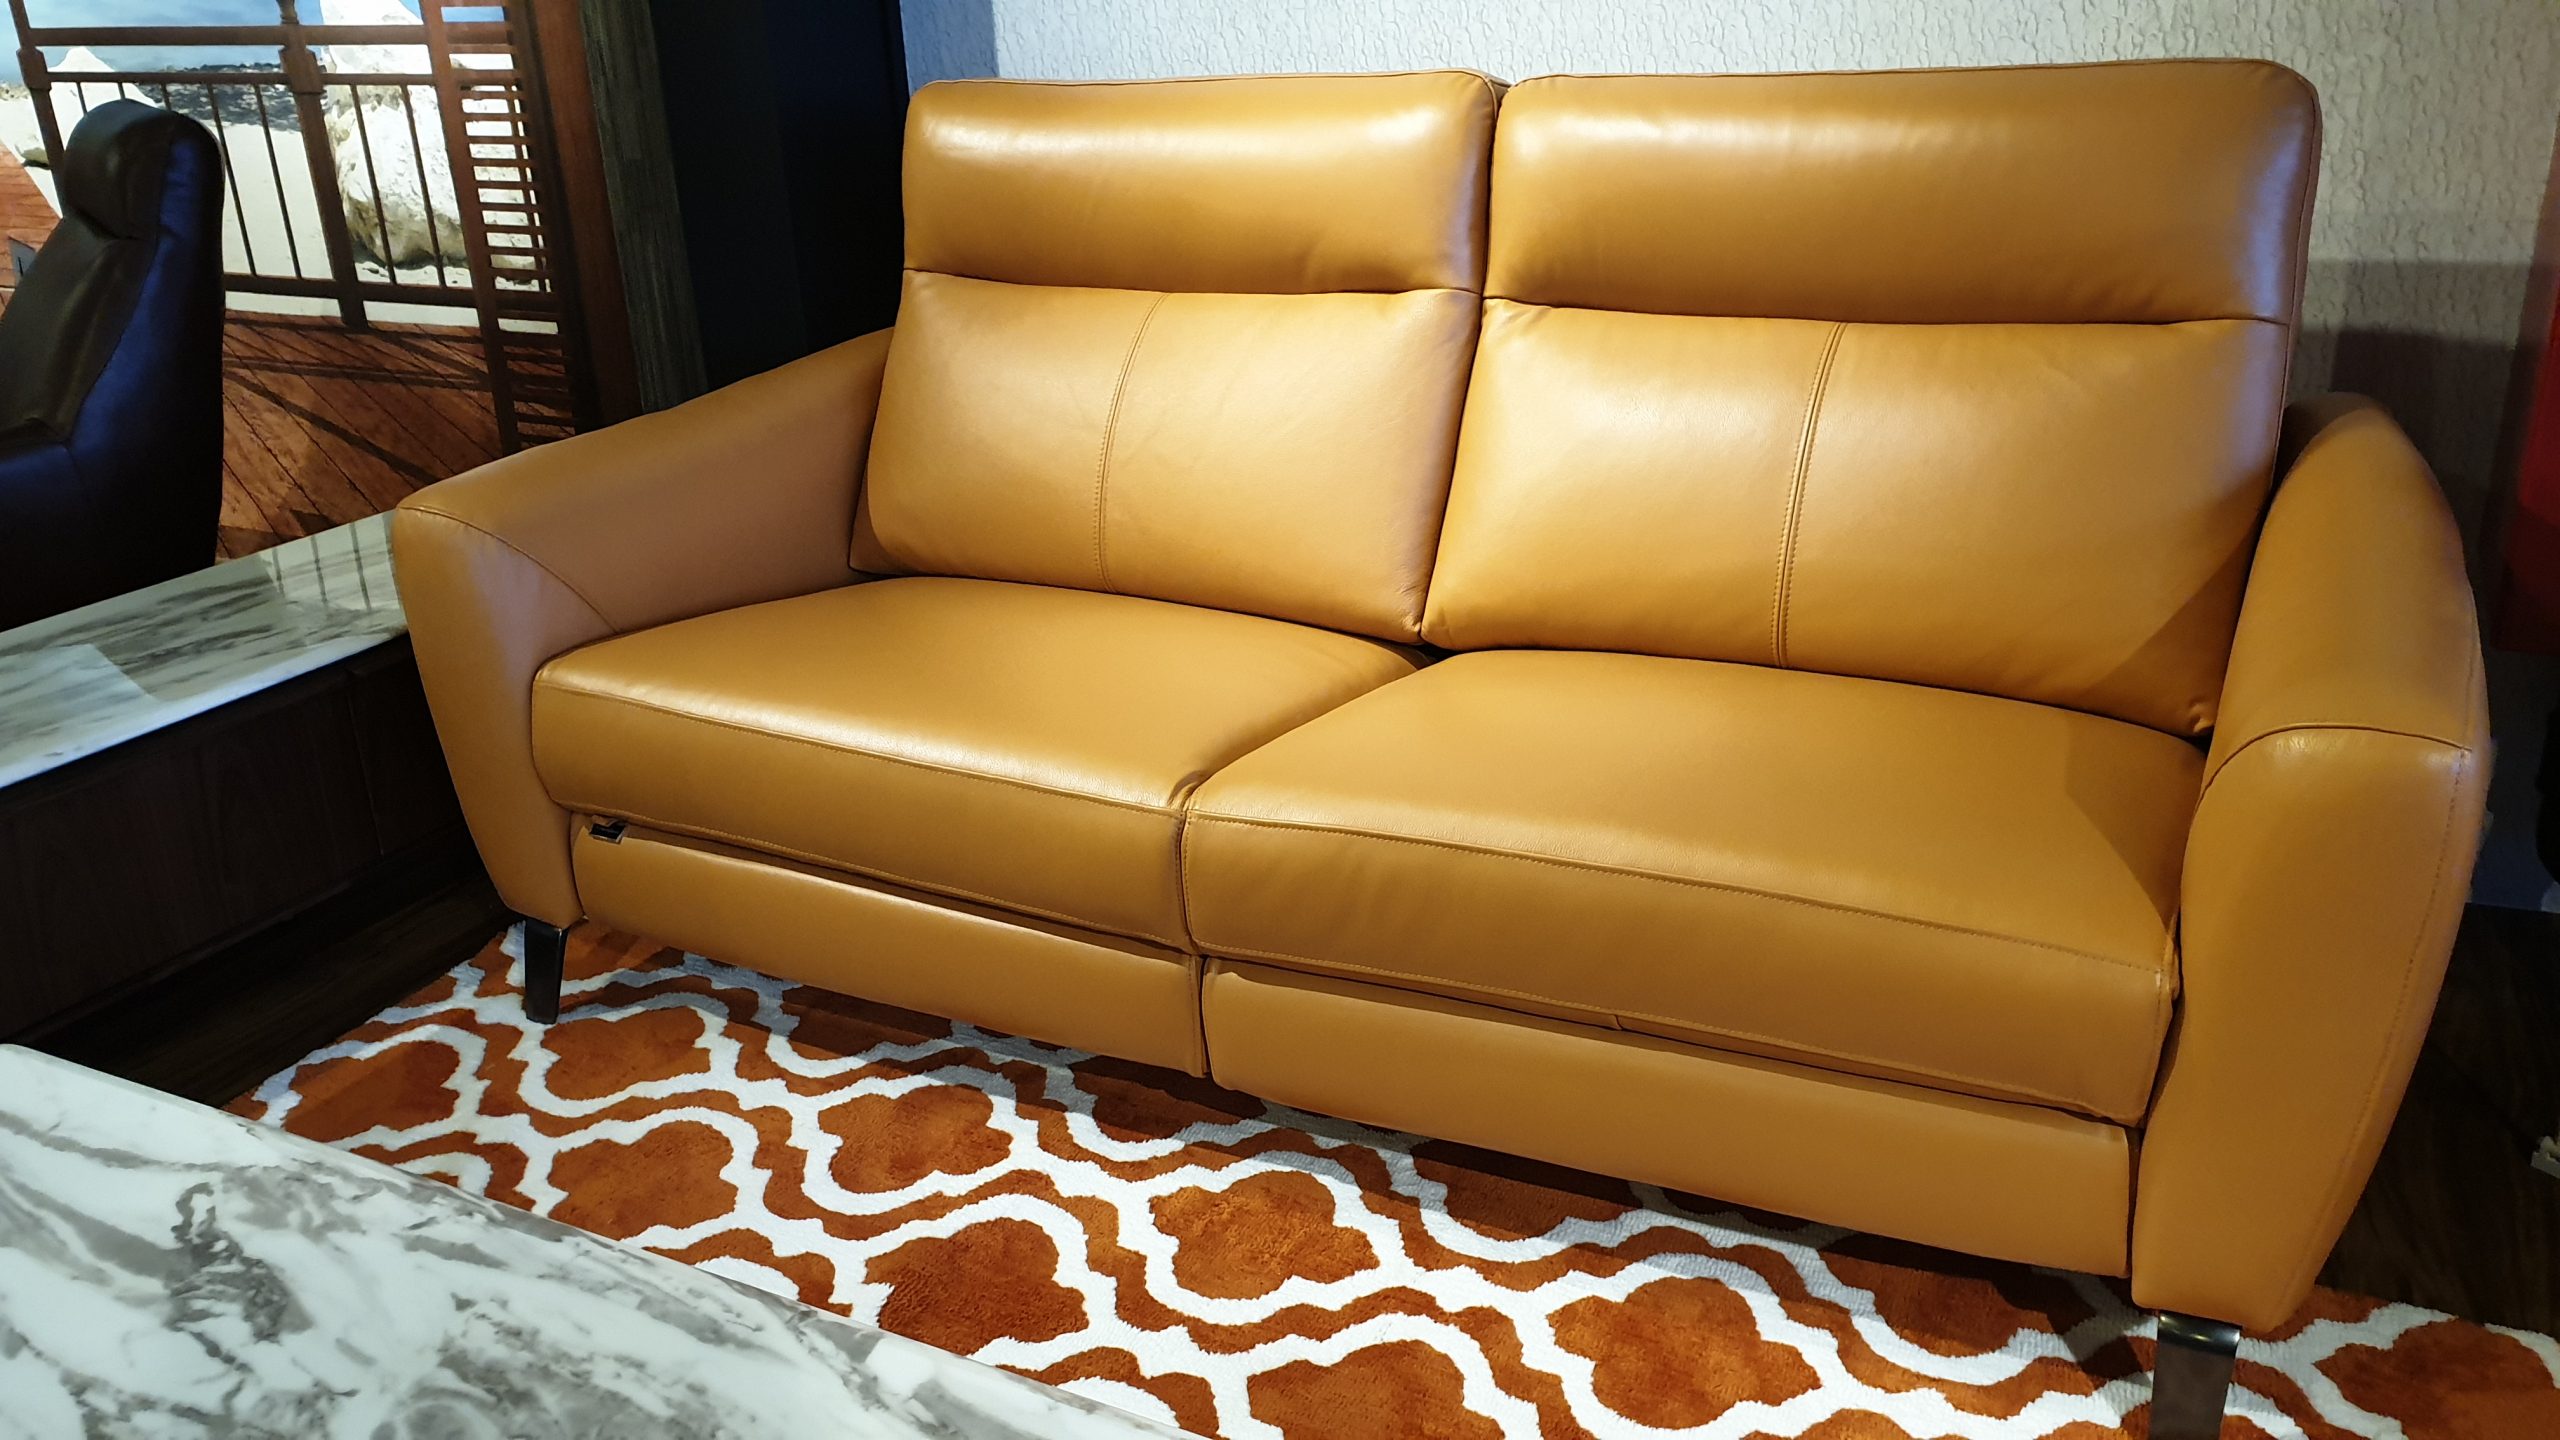 milan leather sofa for sale